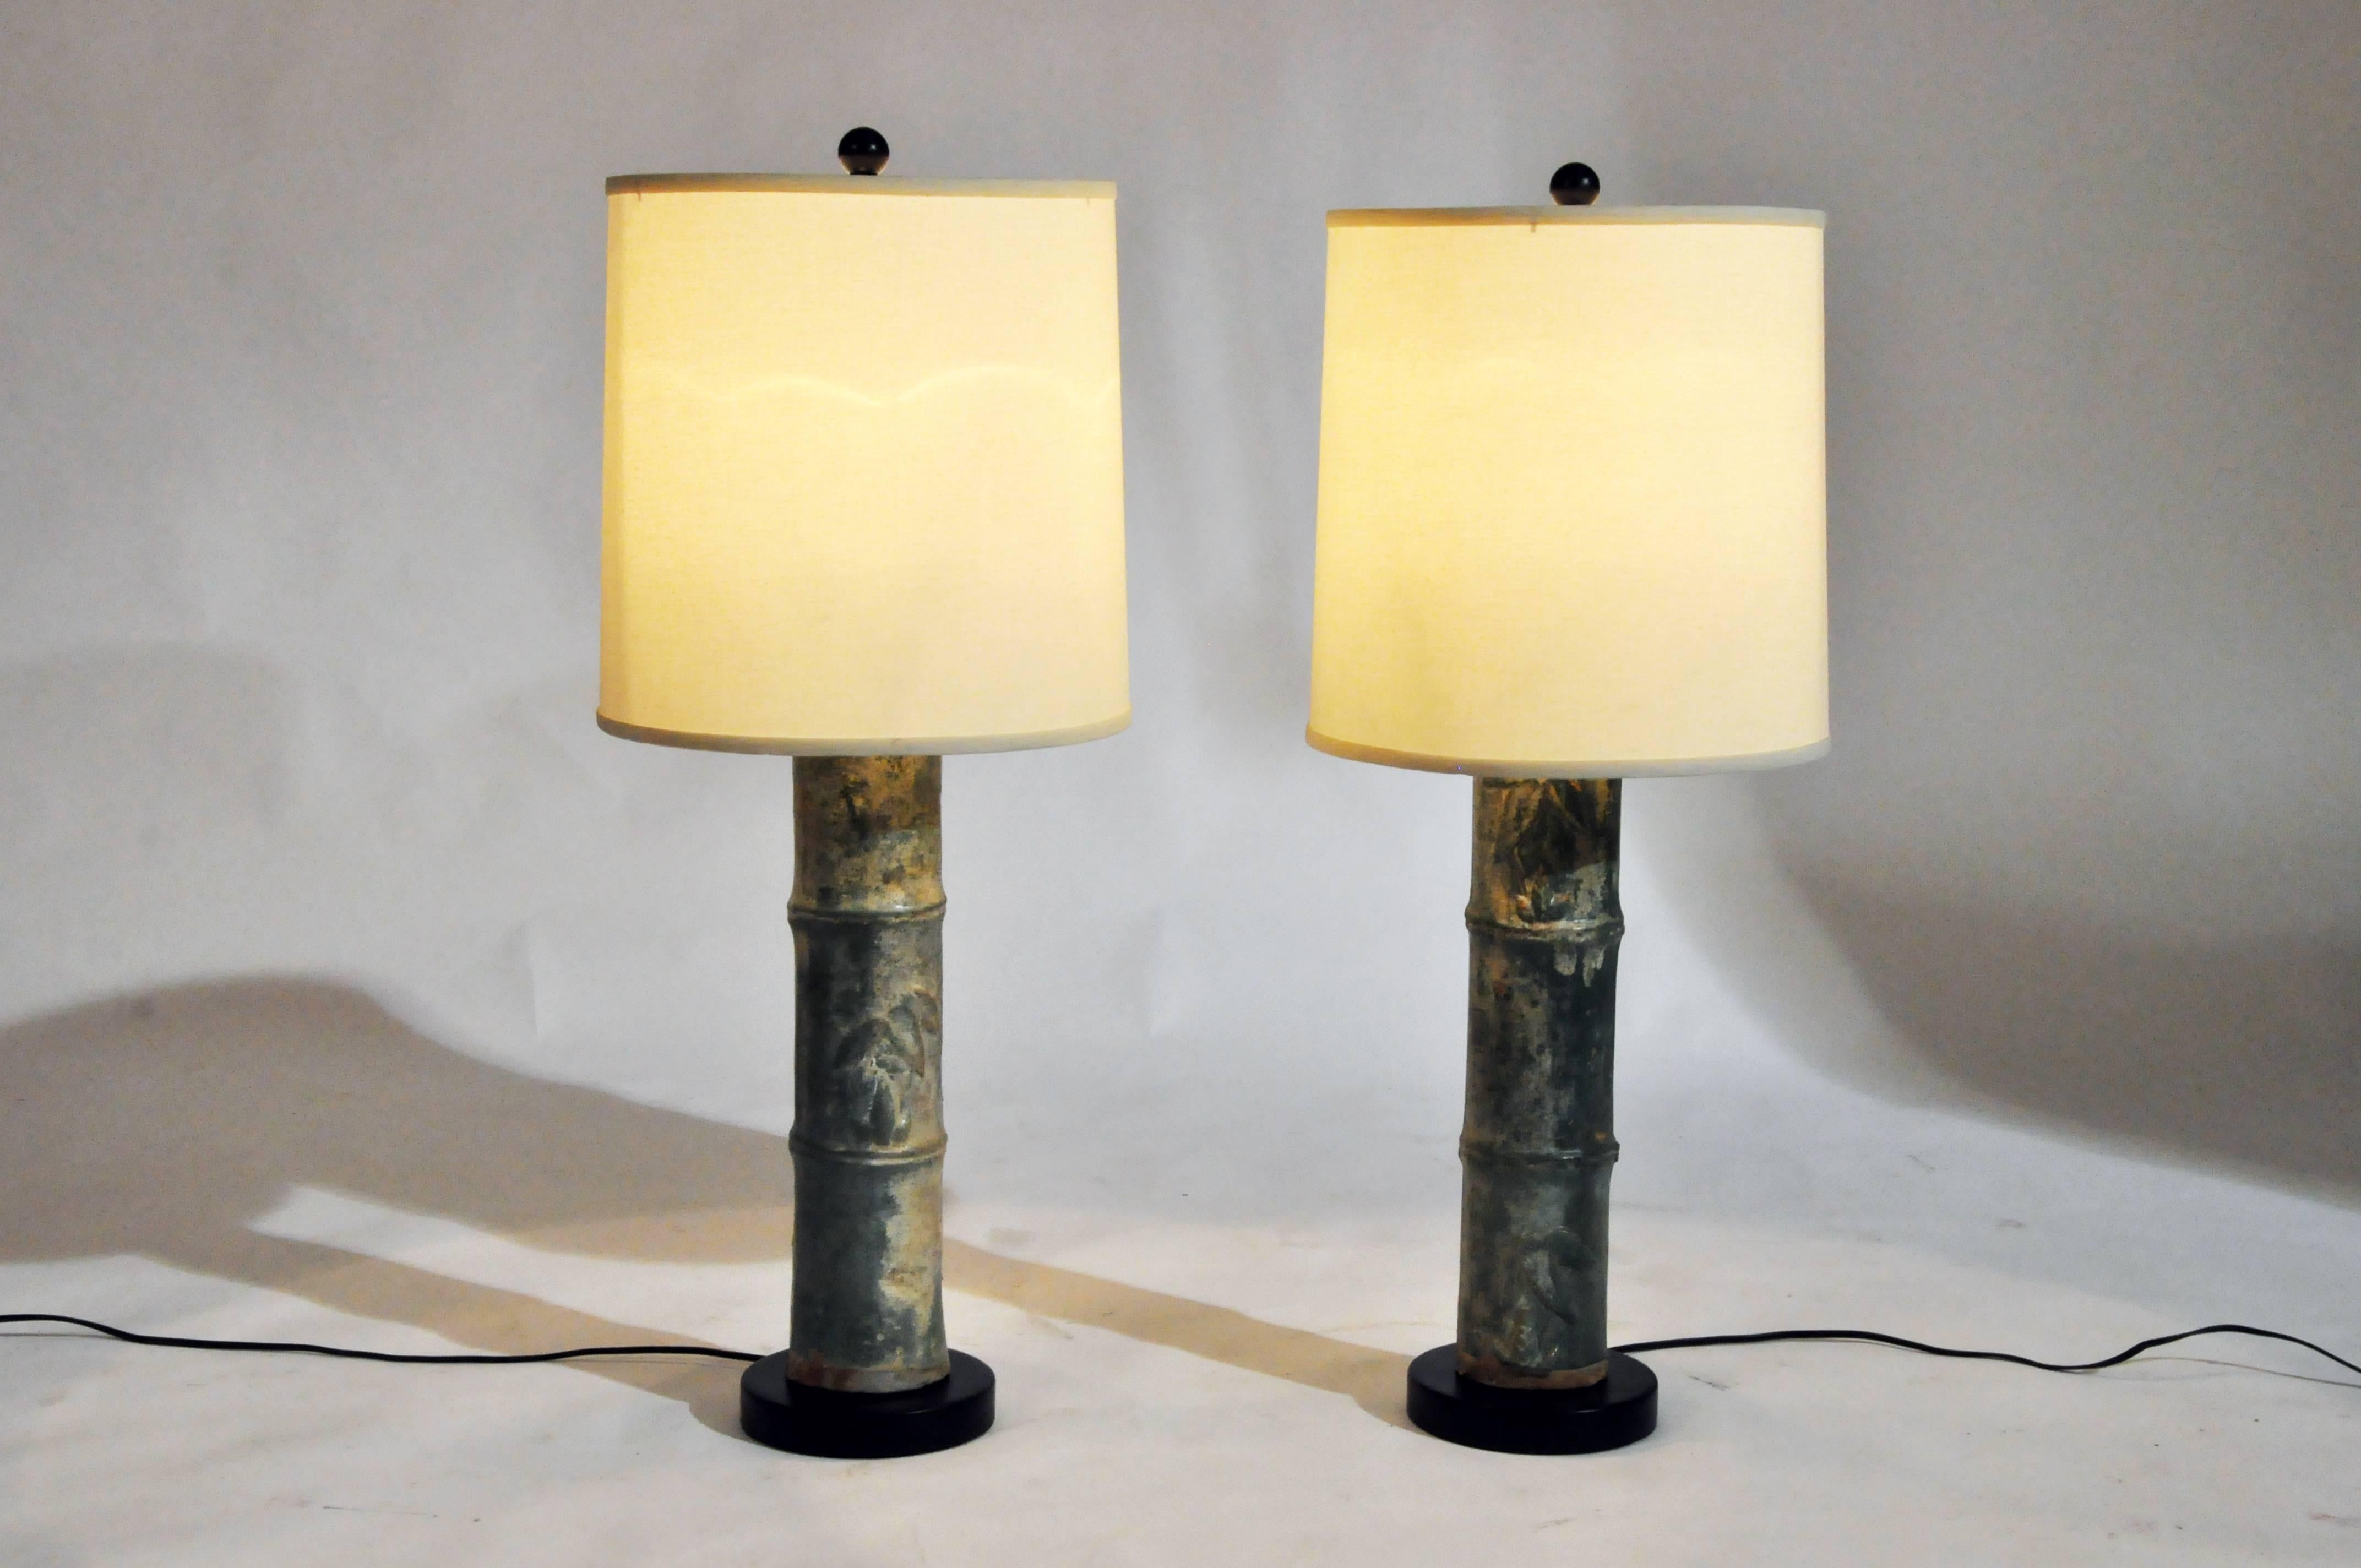 This pair of bamboo trunks is from Vietnam and they have been converted to lamps. They have been wired for use in the U.S.